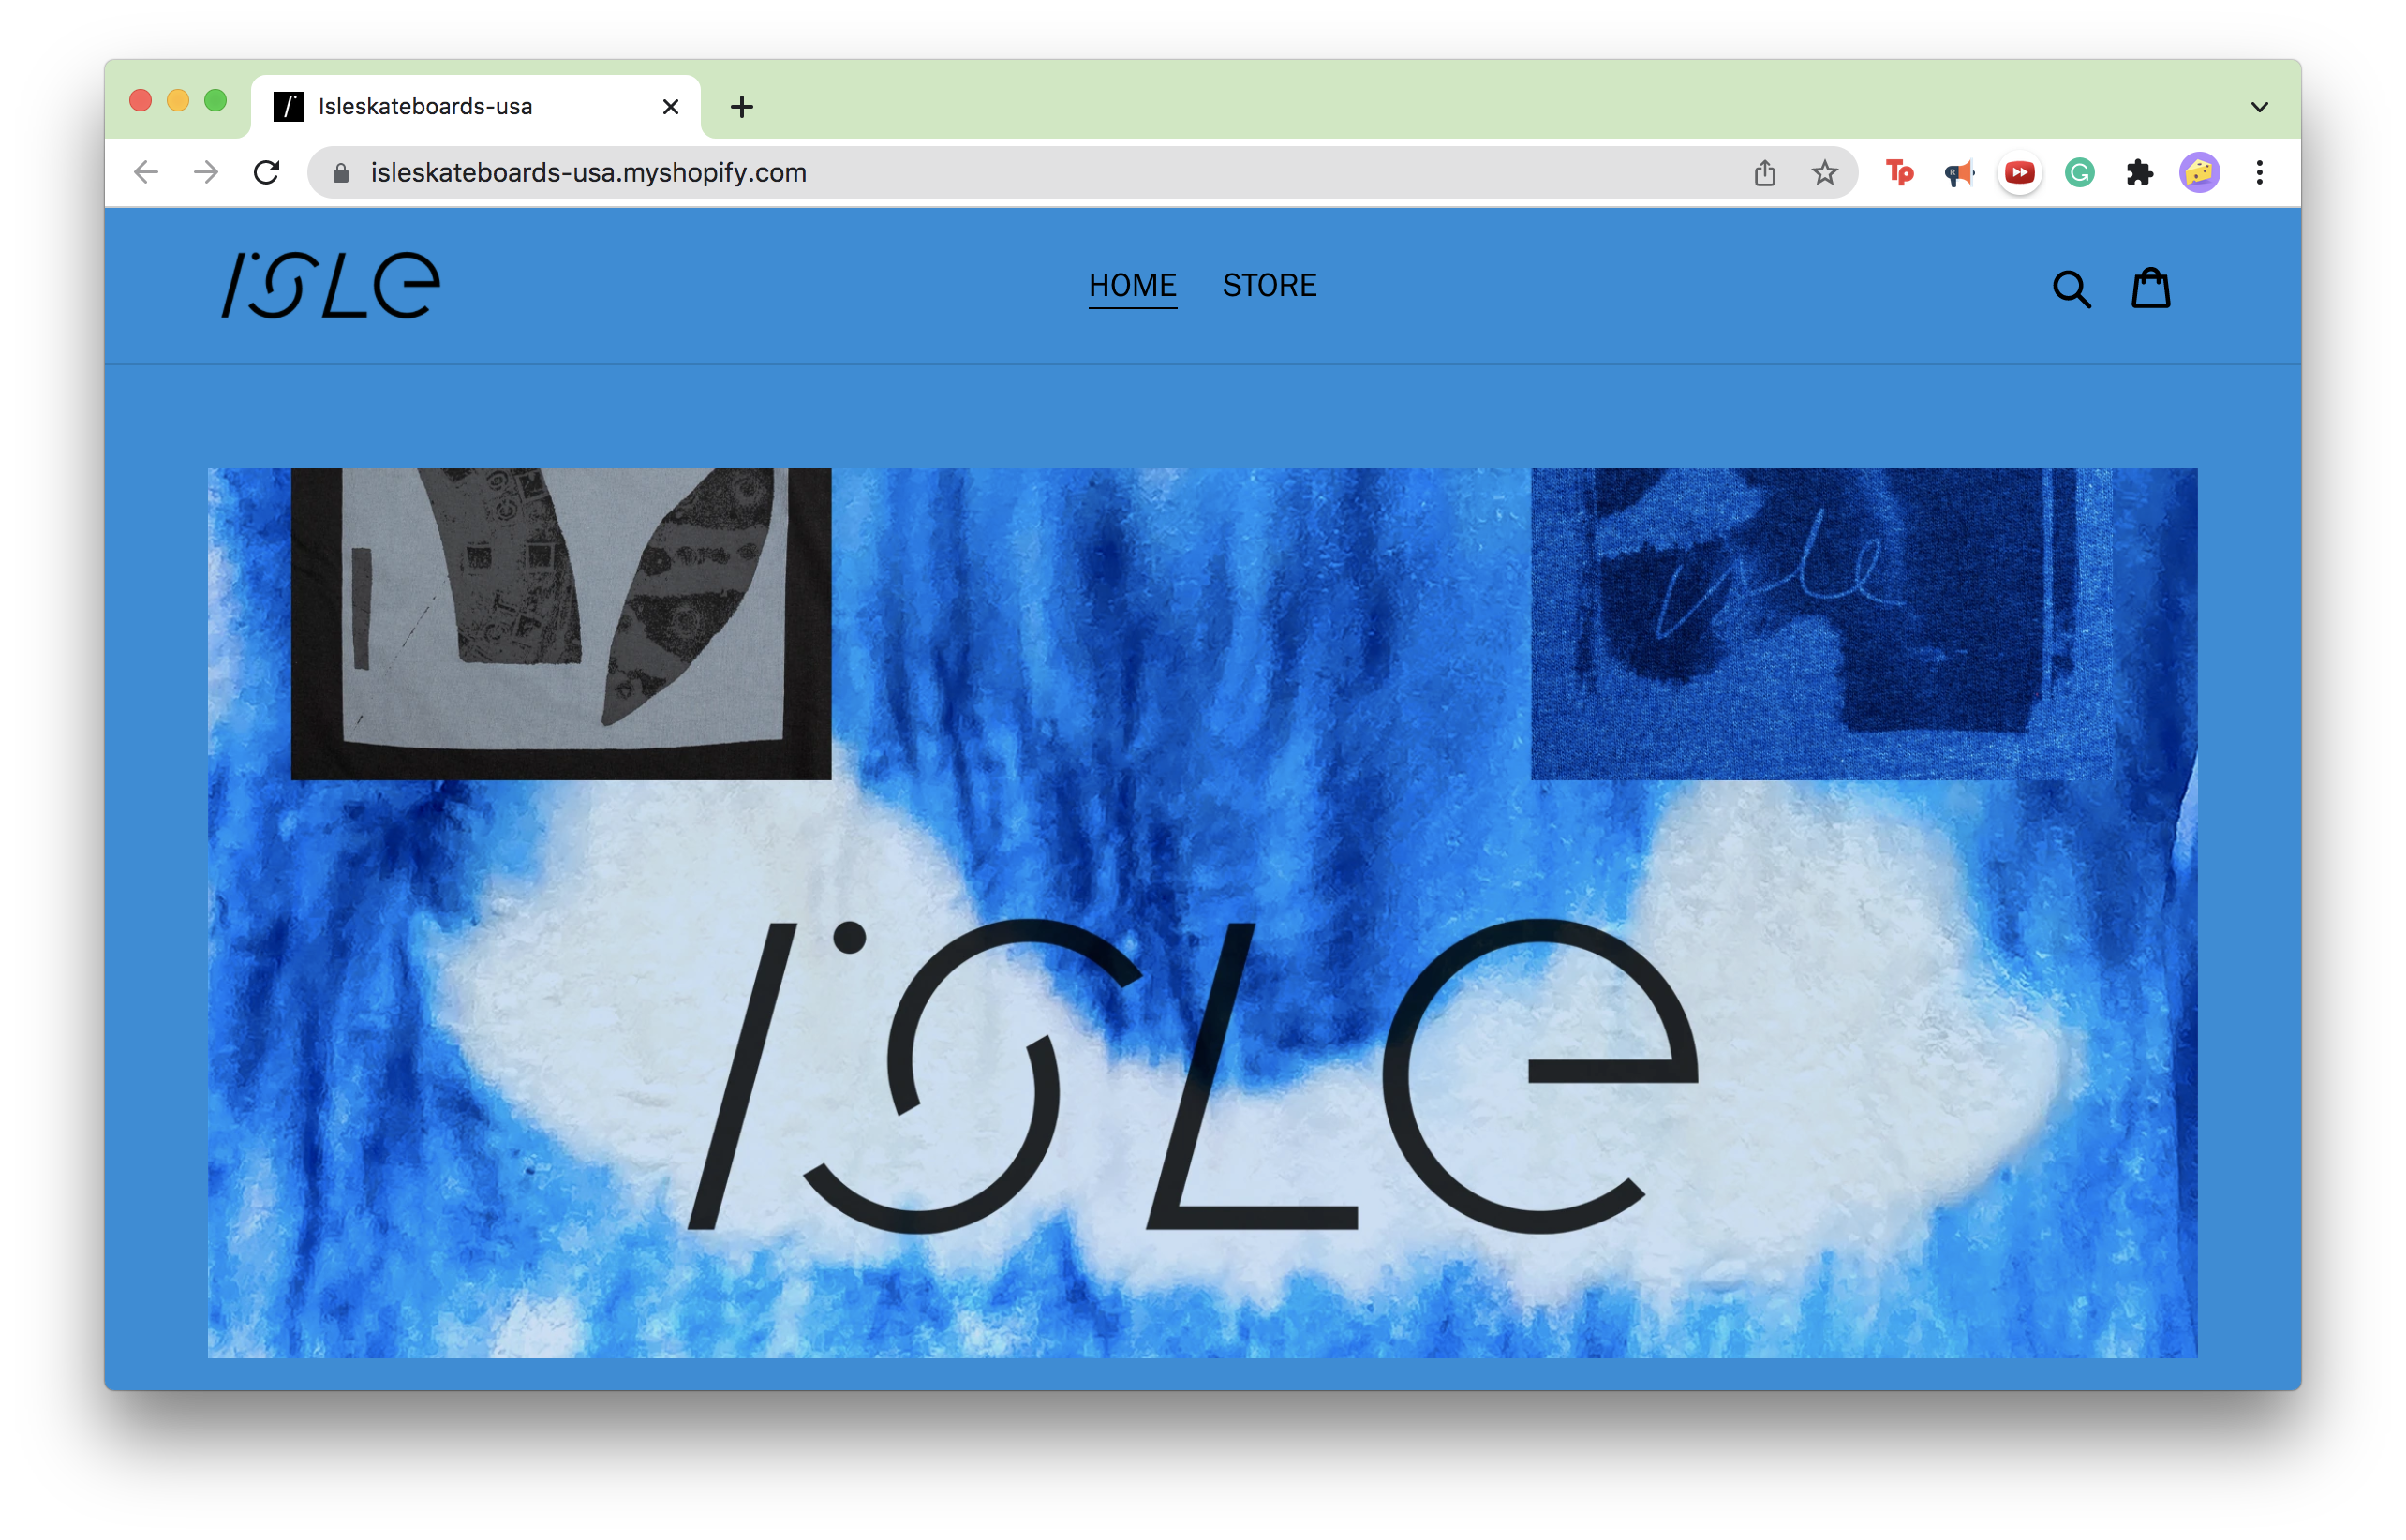 Screenshot of the home page of the Isle website.